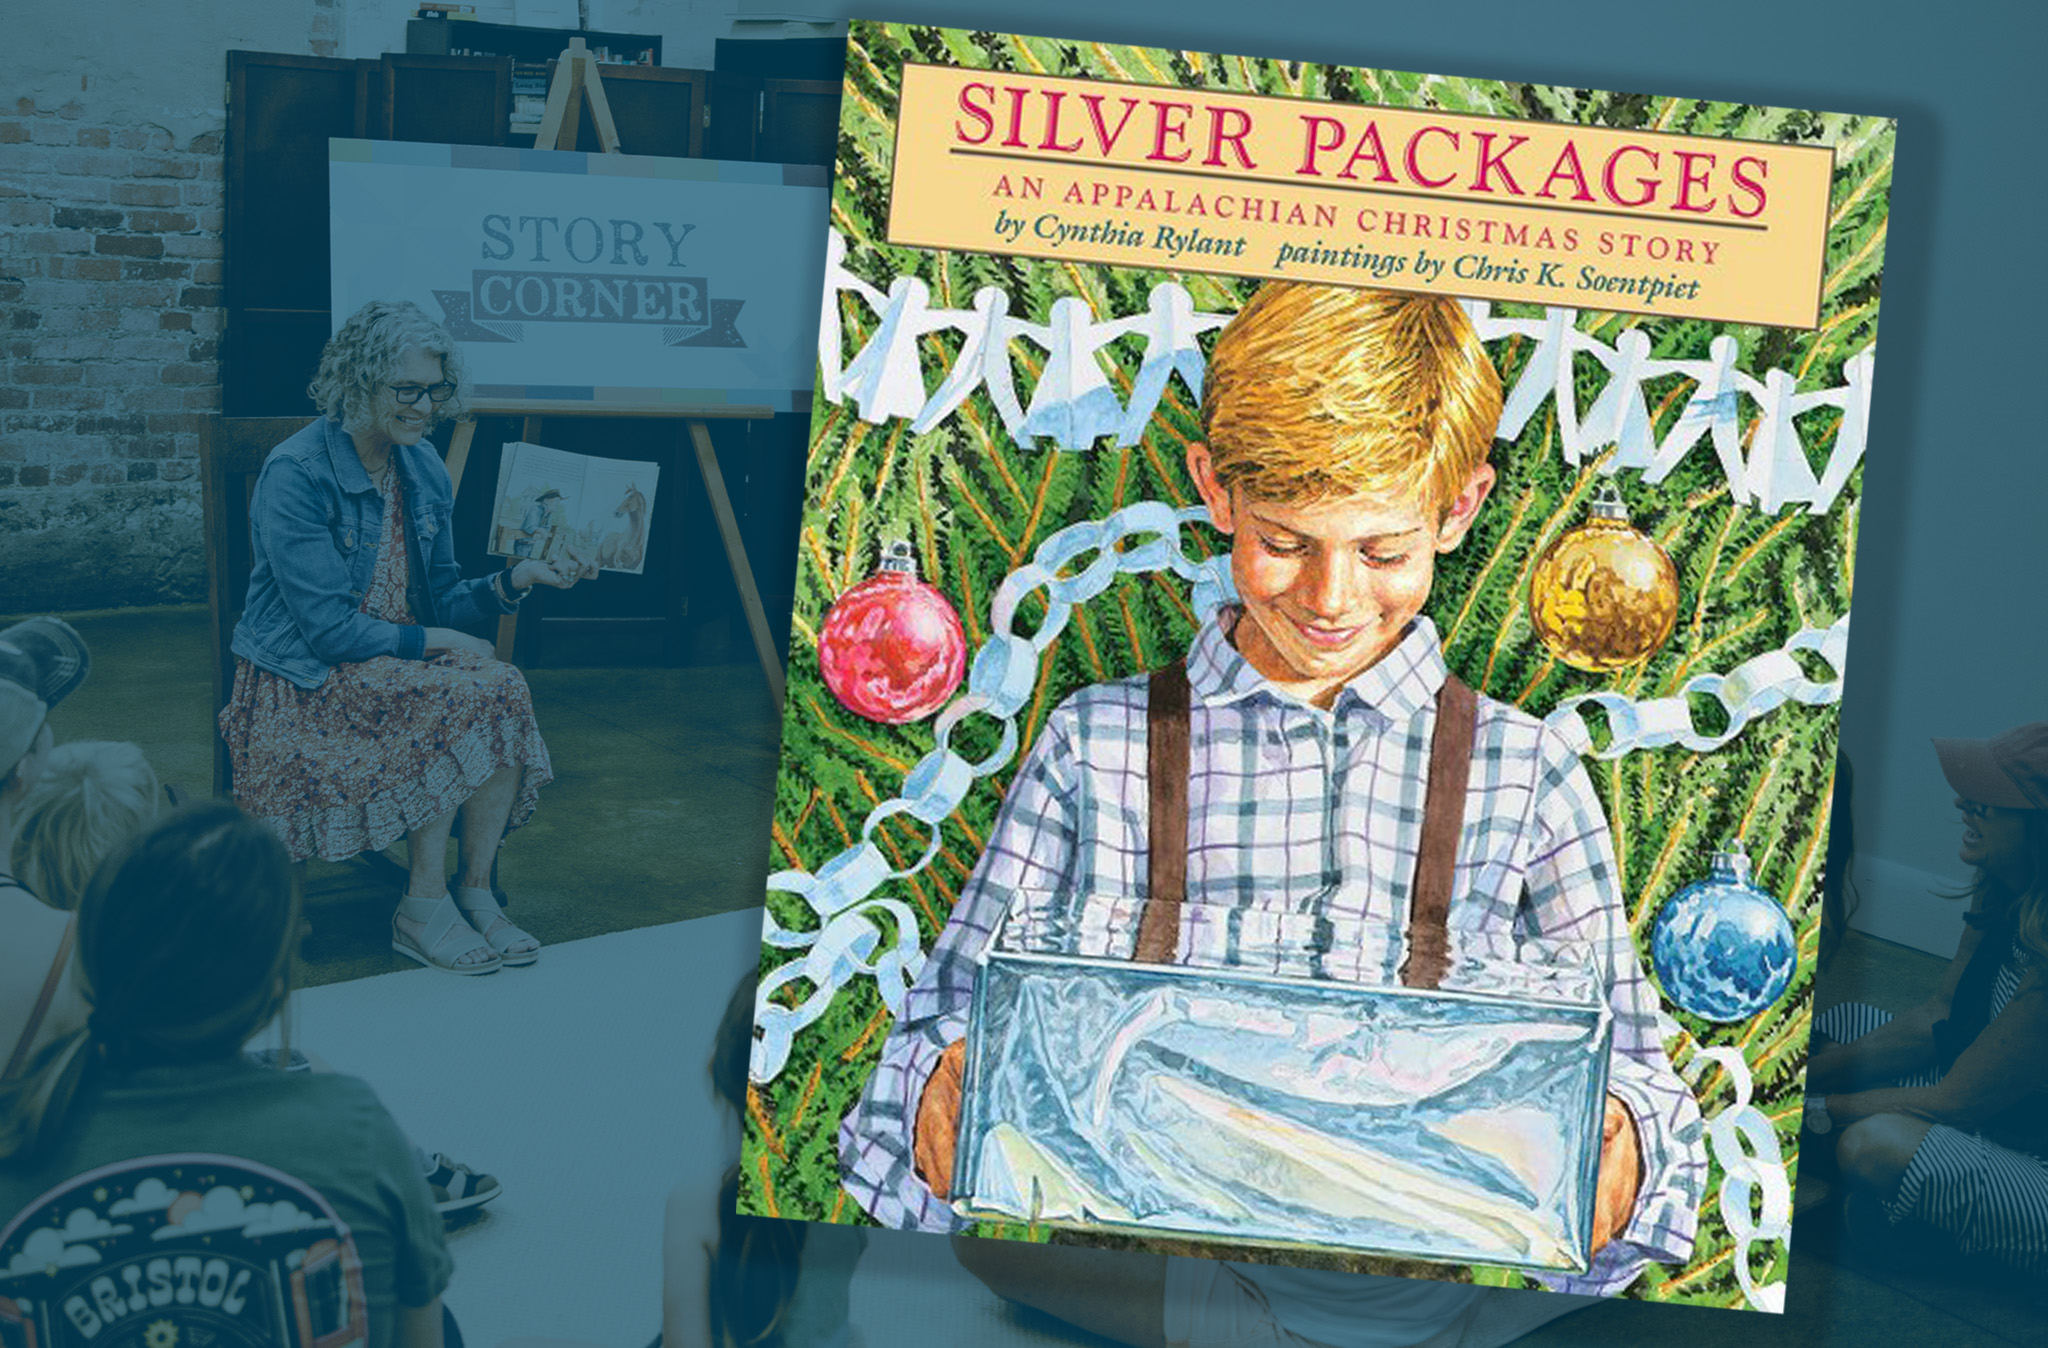 Museum Story Time – “Silver Packages: An Appalachian Christmas Story” by Cynthia Rylant